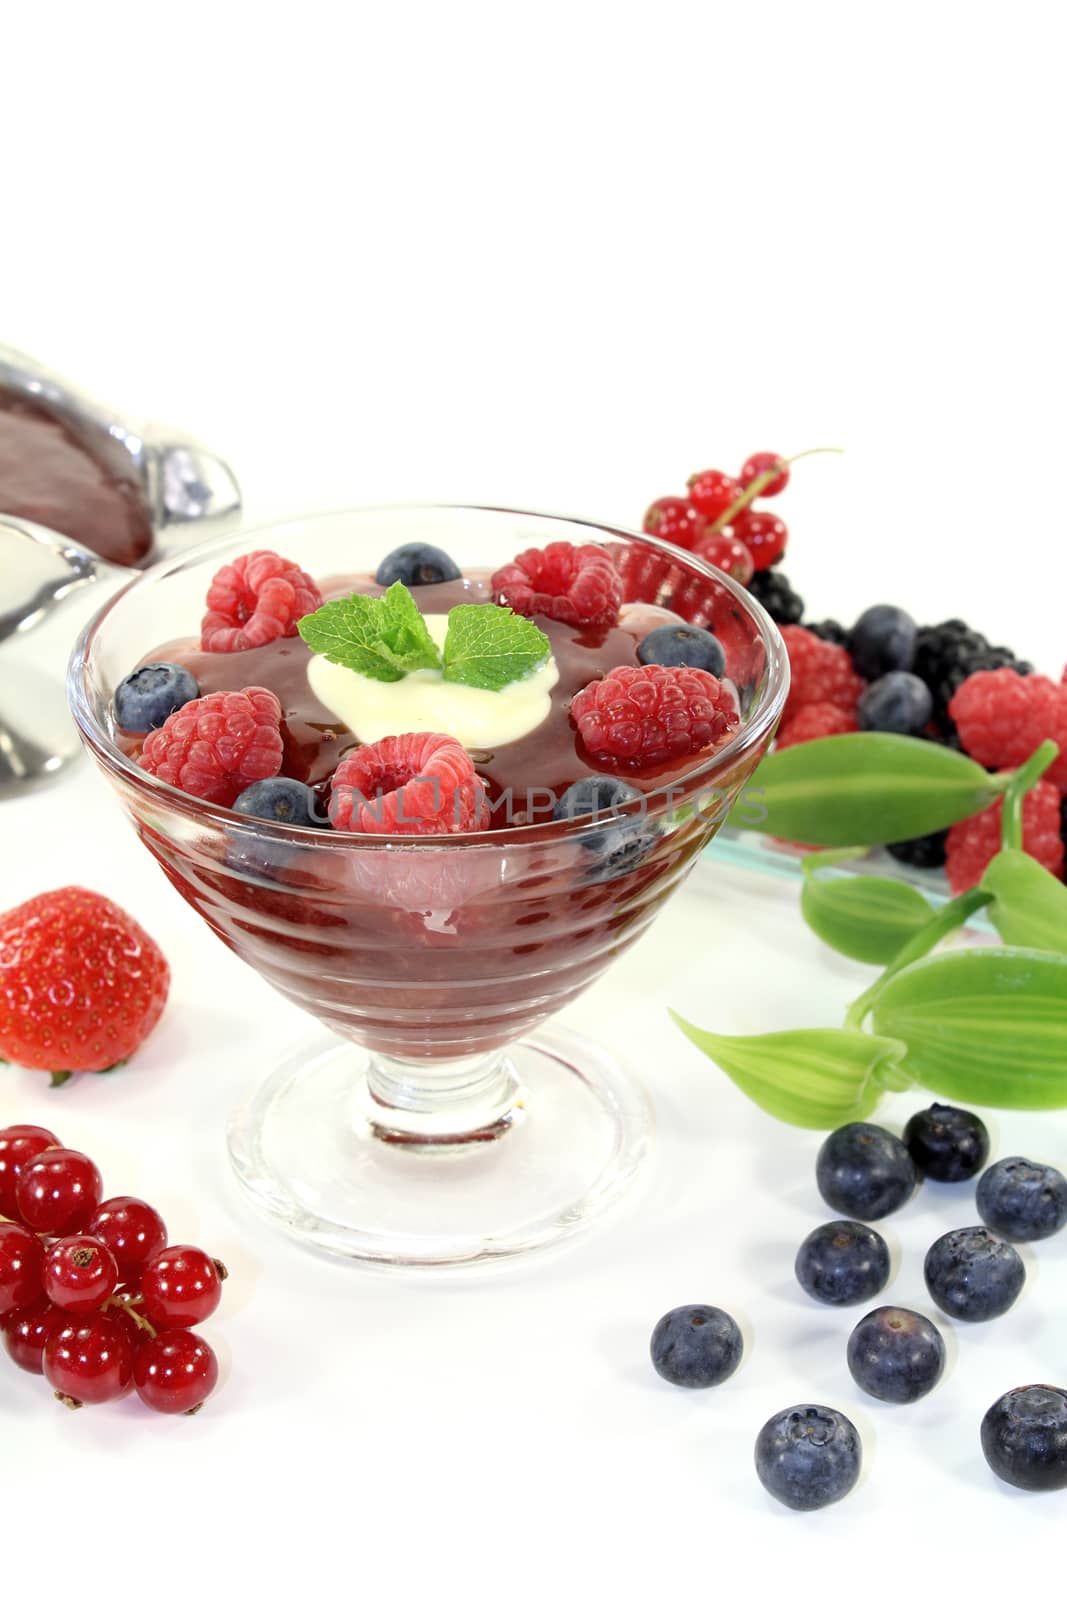 red fruit jelly with custard and vanilla leaves on a light background